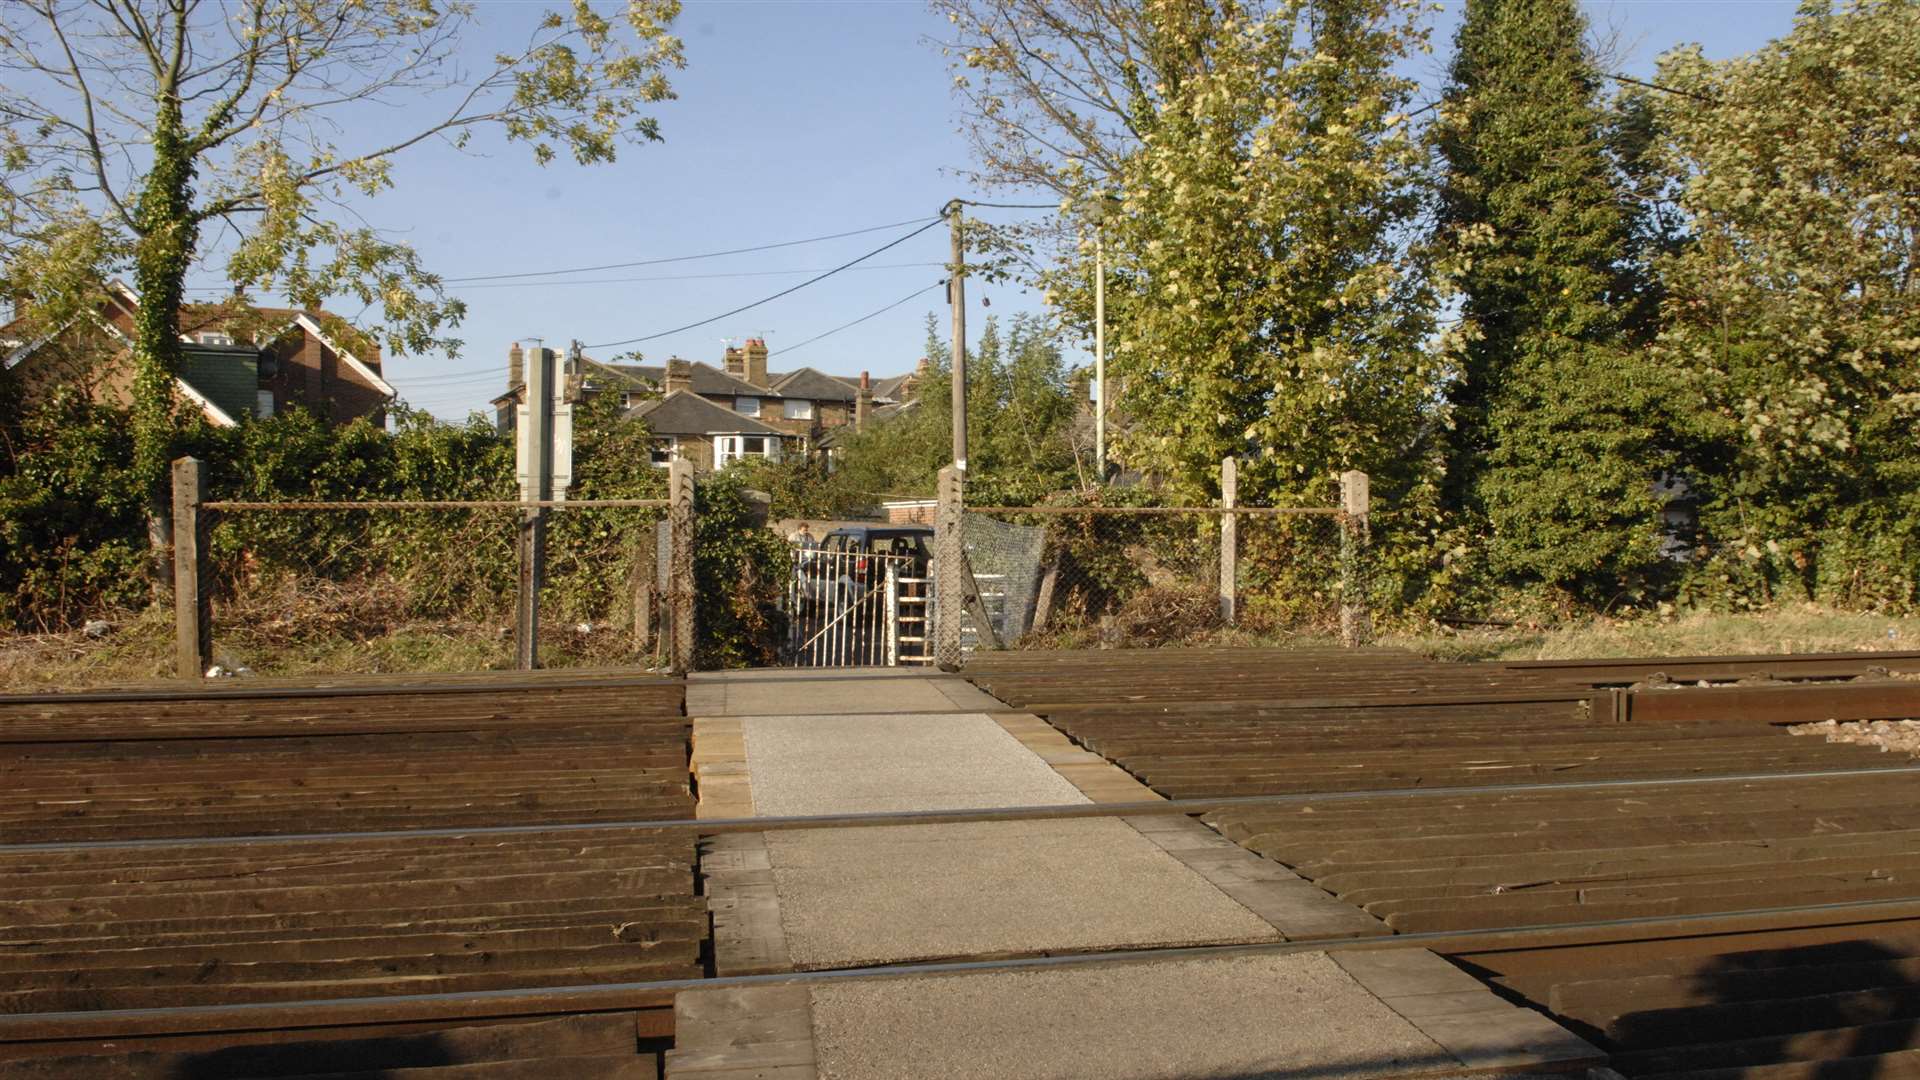 The current Glebe Way crossing.